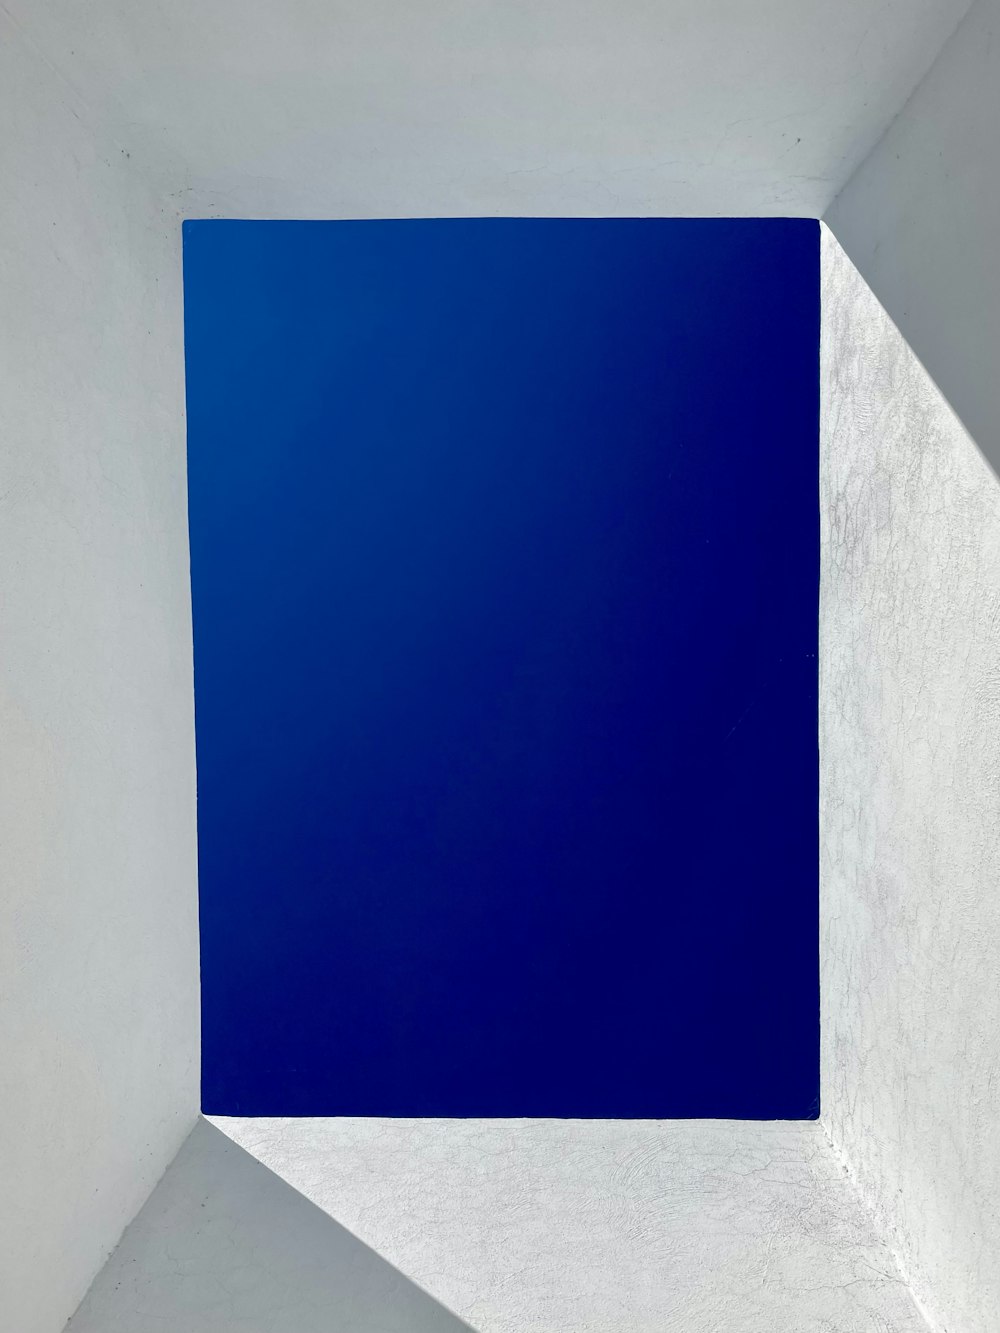 a blue square in the middle of a room